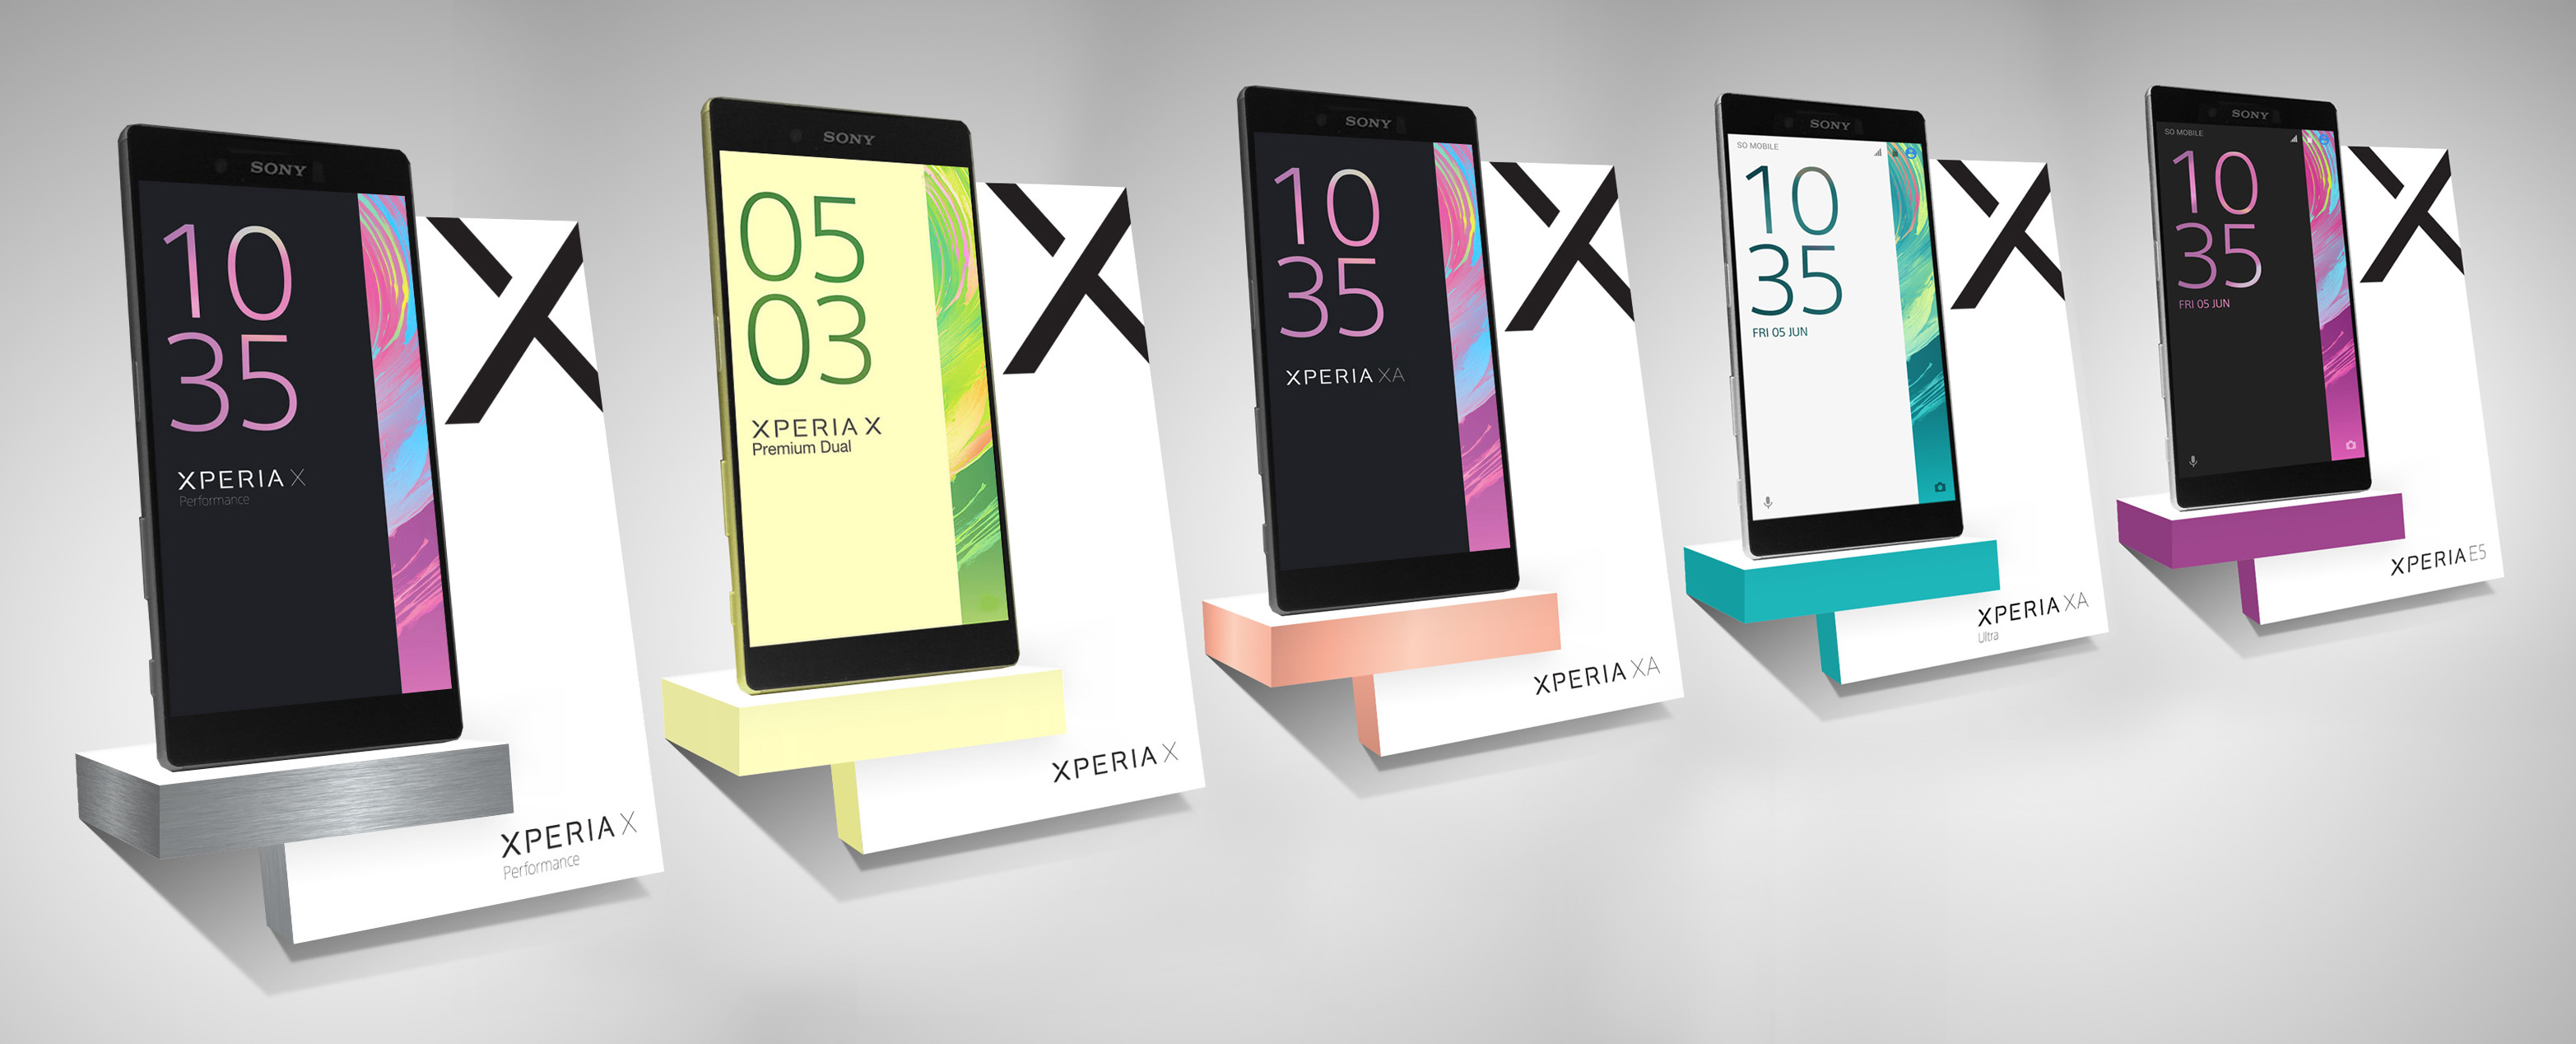 Sony Xperia X phone with box and stand in different colors